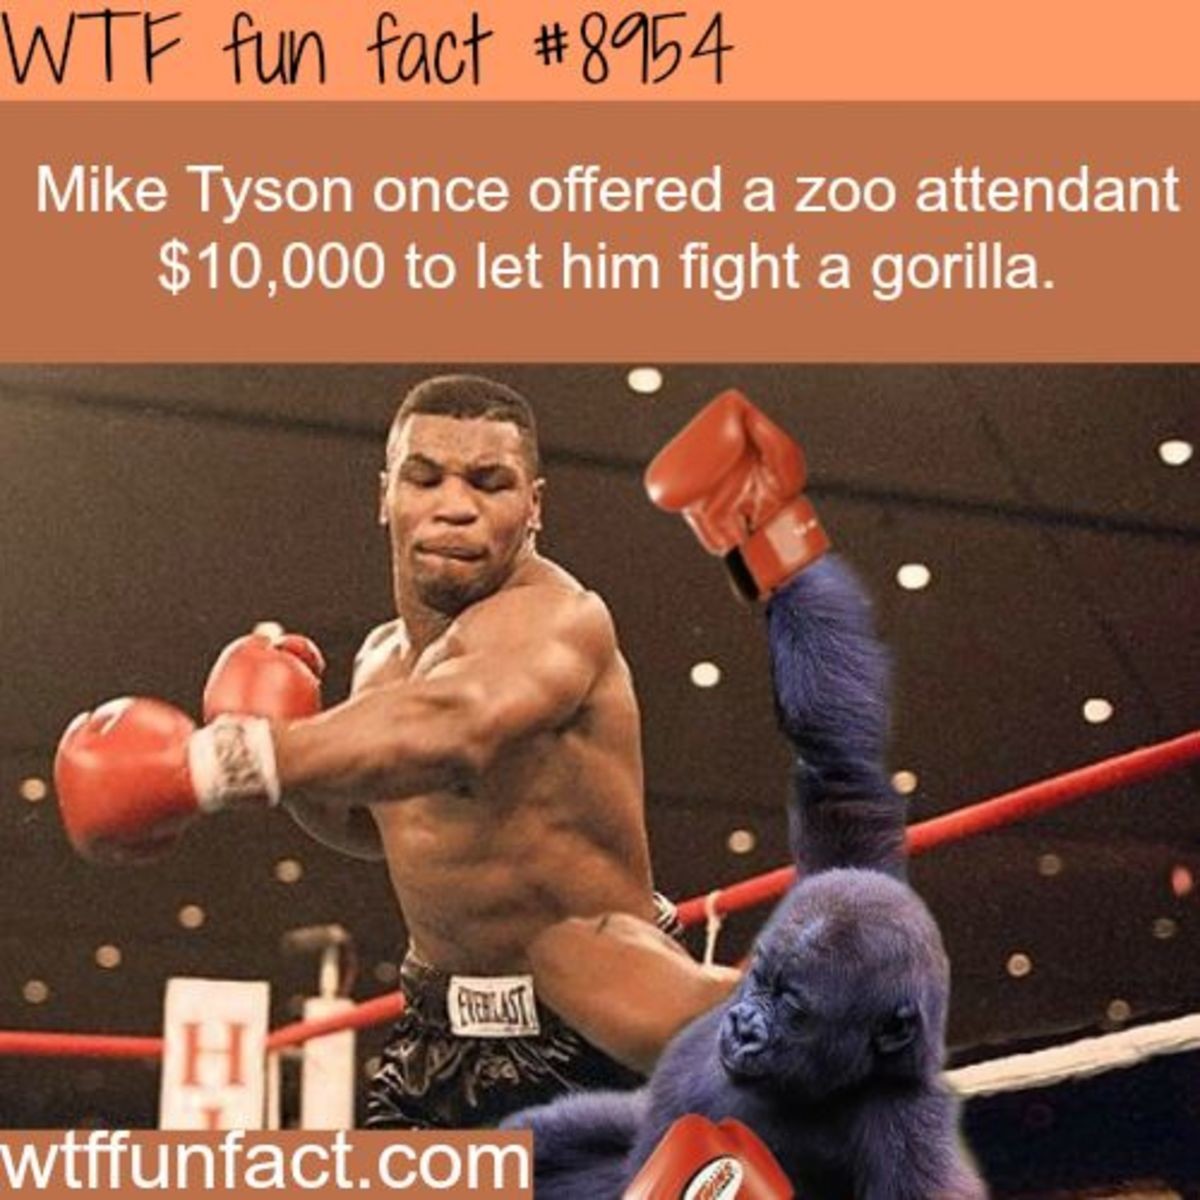 Tyson Wanted To Fight A Gorilla. You know he would have done it... The gorilla would have pulverized Tyson, is he insane?